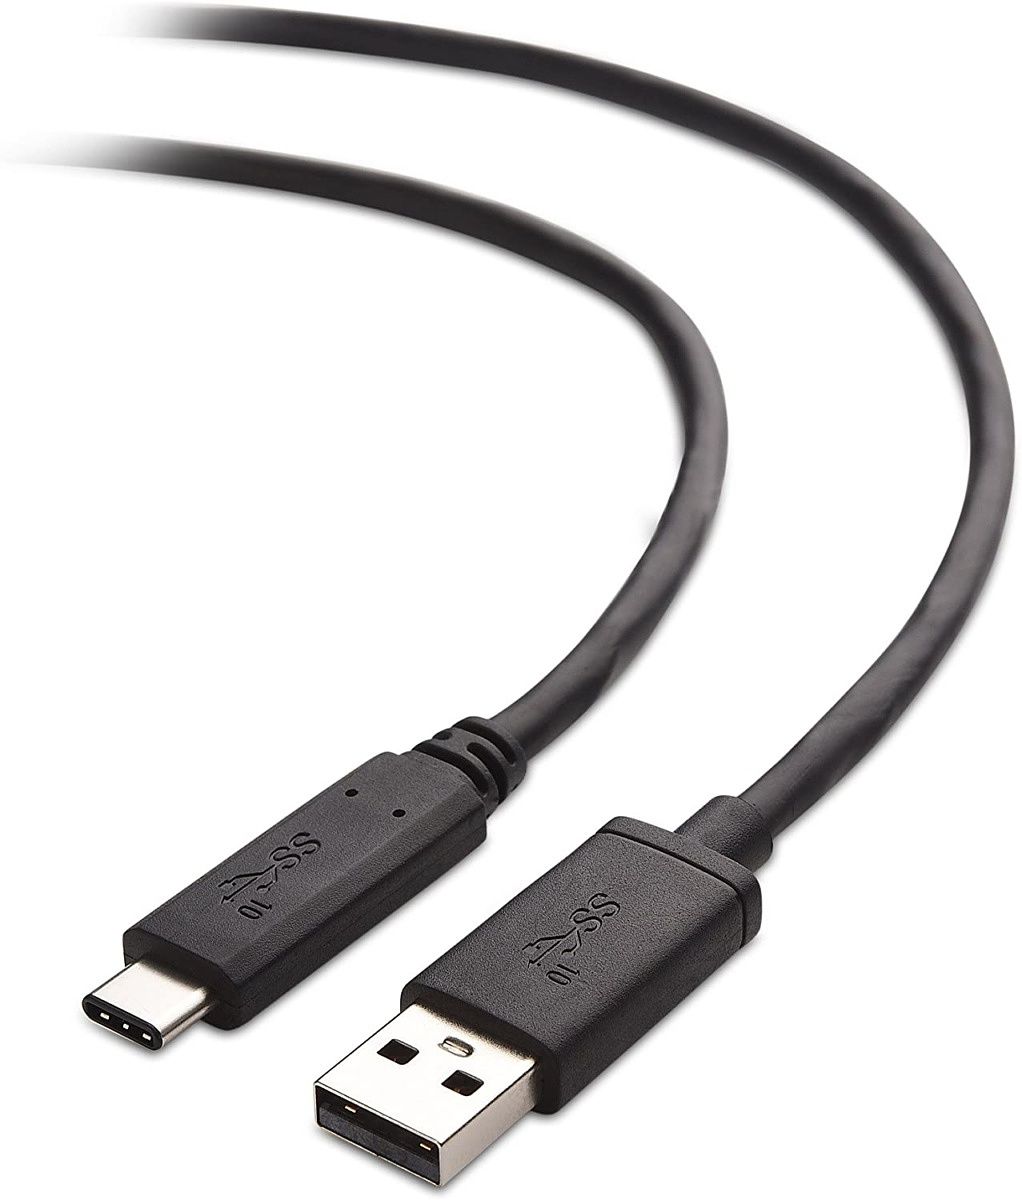 If you aren’t looking to spend much on a cable, this Cable Matters USB Type-C cable will interest you. Despite its lower price tag, the cable is quite decent and supports up to 10Gbps data transfer. Additionally, you’ll get up to 15W fast charging.